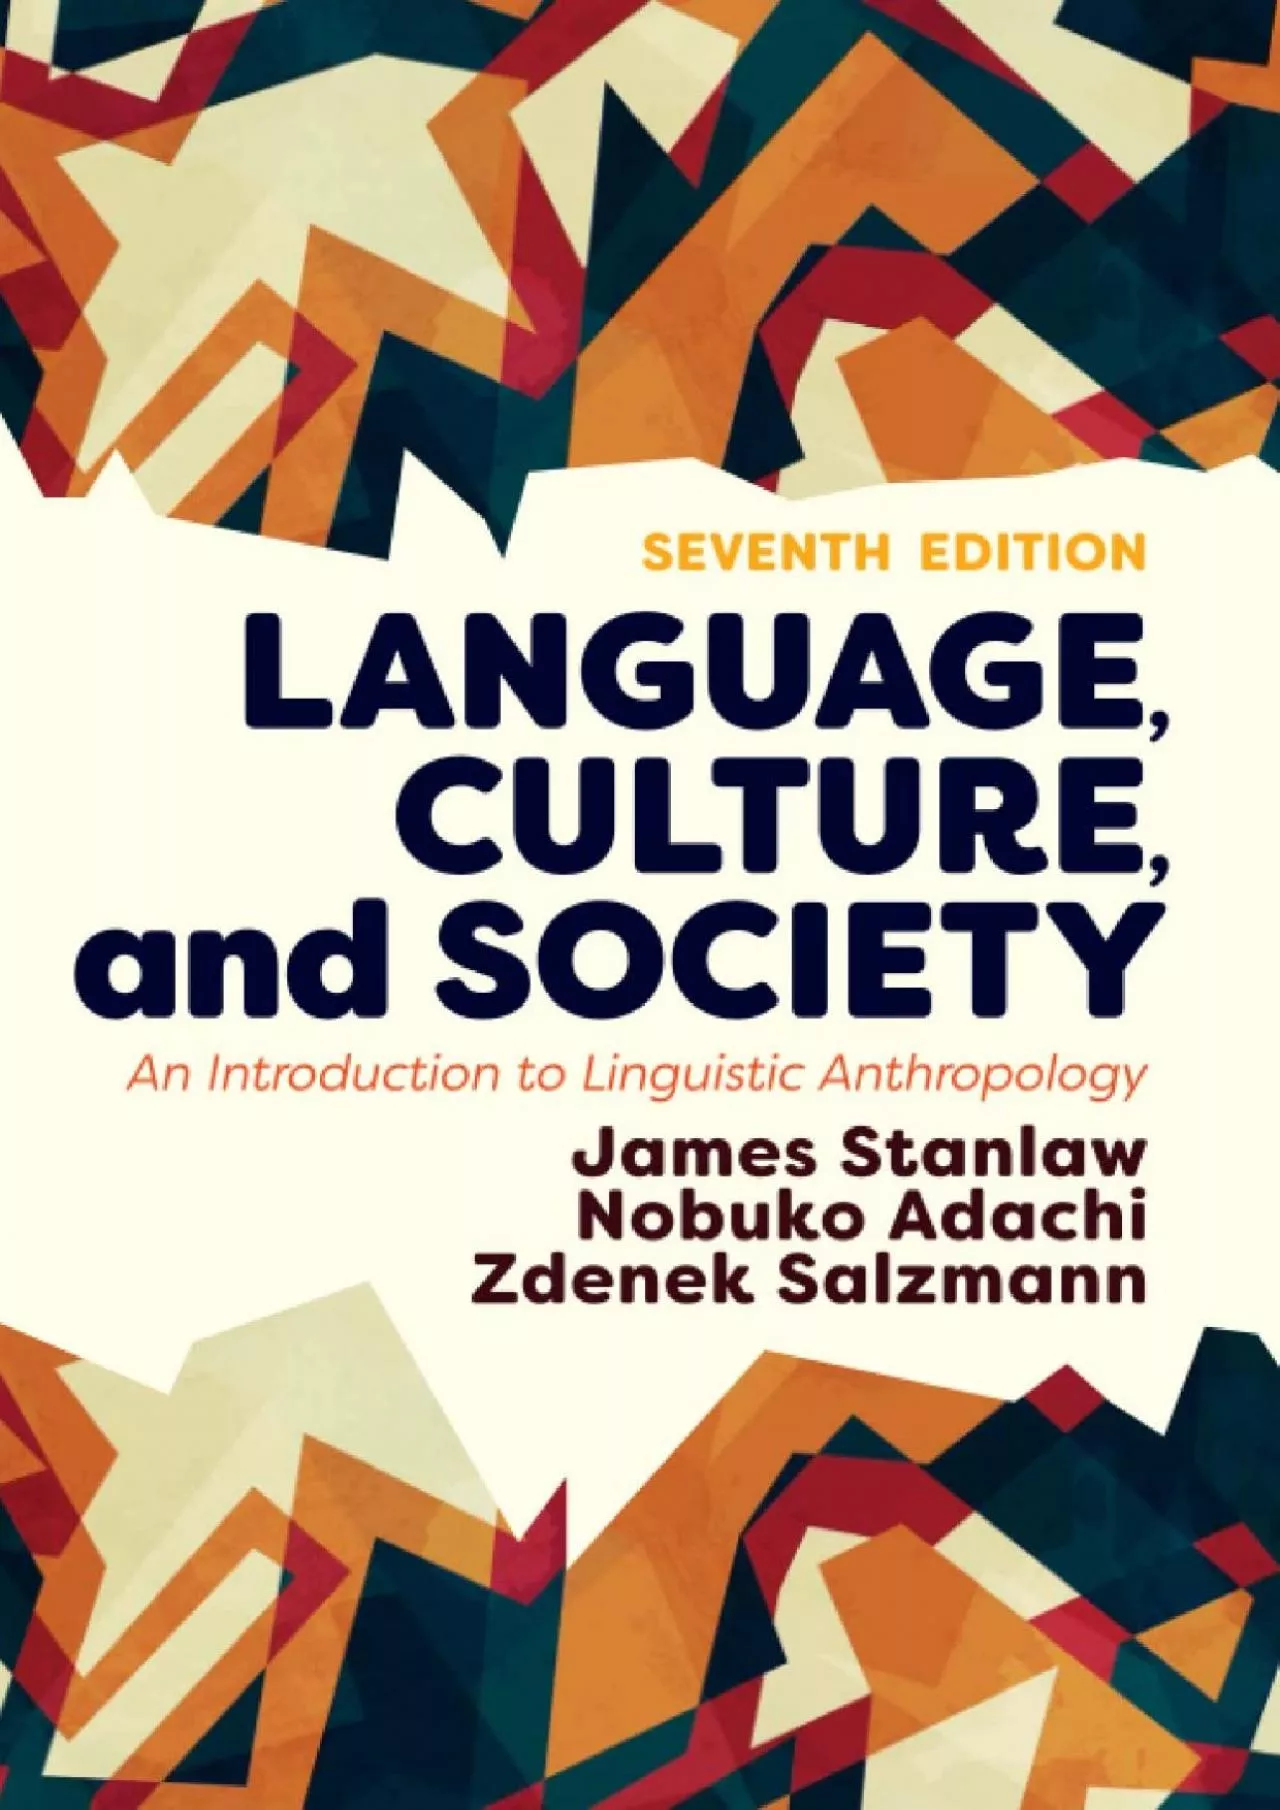 (EBOOK)-Language, Culture, and Society